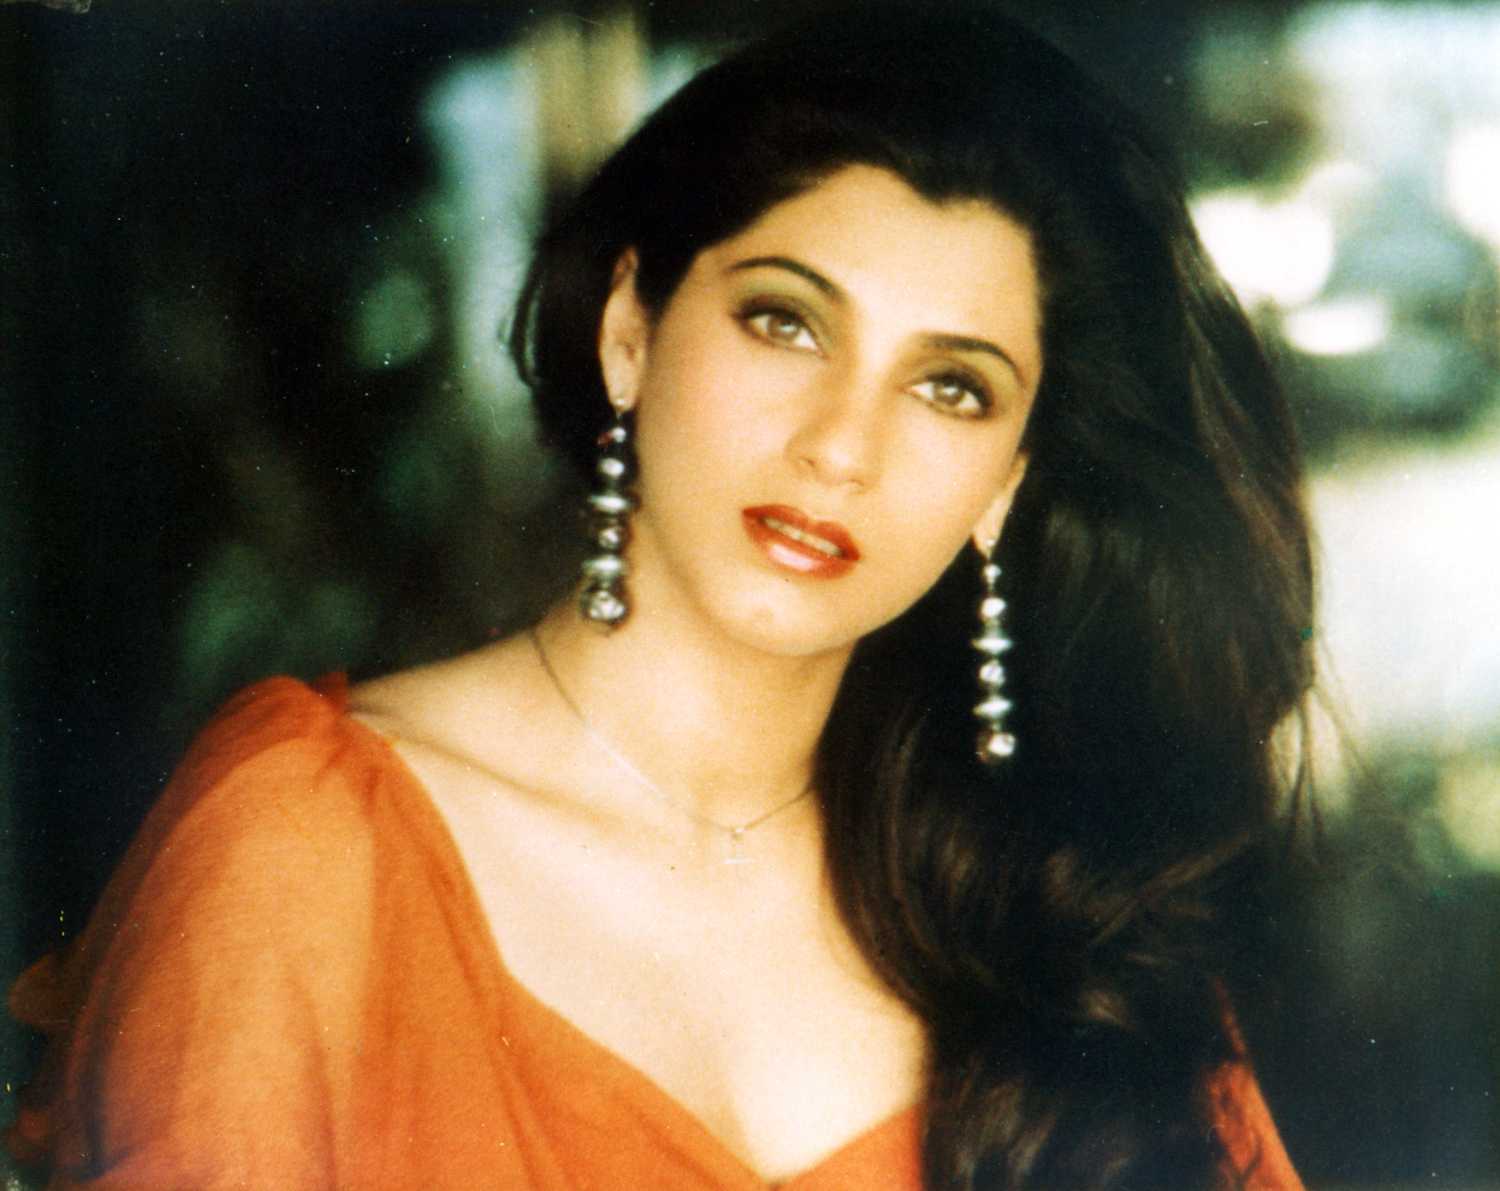 Dimple Kapadia's daughter didn't do really well on the screen so she left acting and pursued her love for writing. She is also a  _______ along with an author.